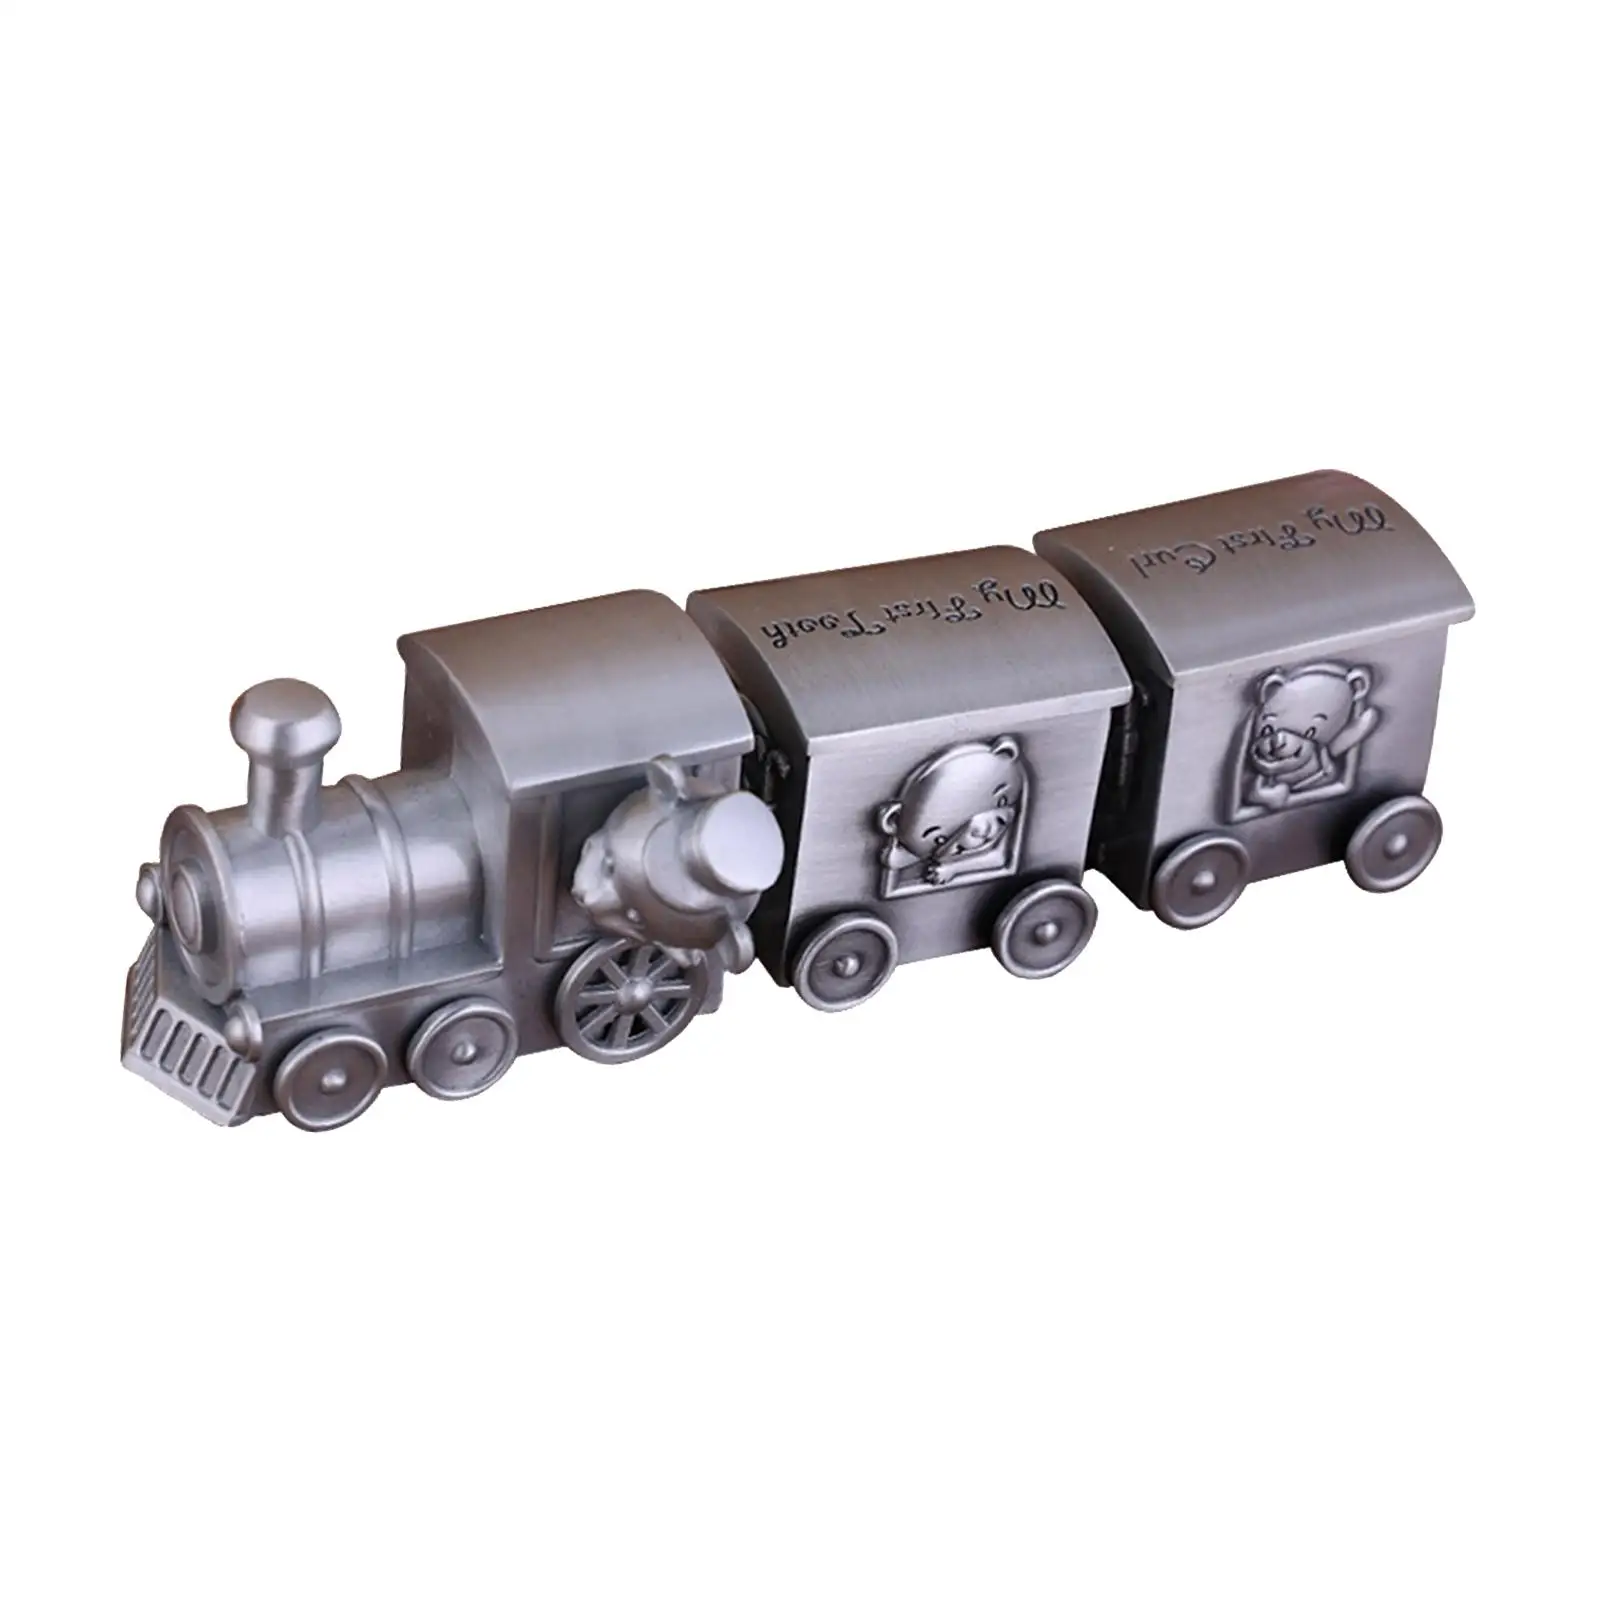 Train Tooth Holder Holder Children Growth Witness Saver Box Baby Collections Box for Baby Shower Nusery Decor Birthday Gift